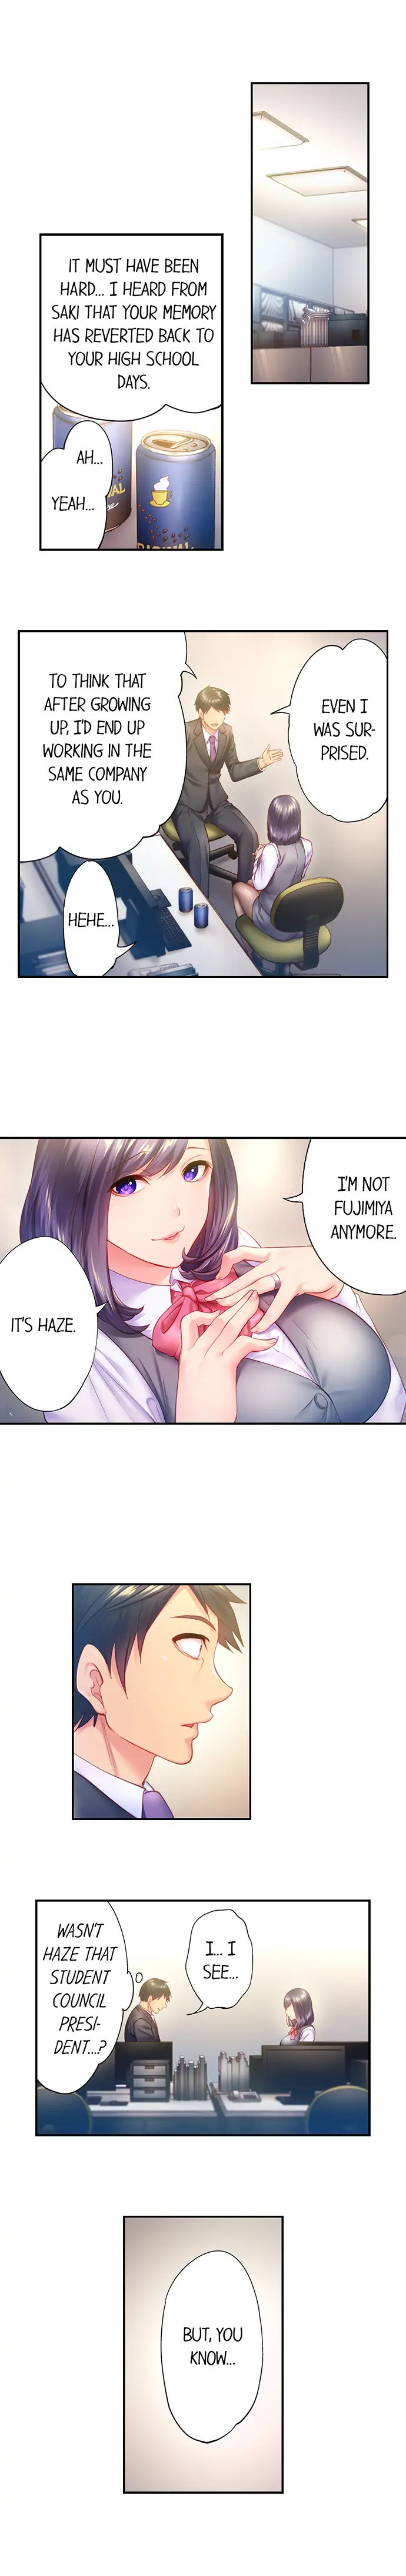 First Time With My Wife (Again) - Chapter 5 Page 6